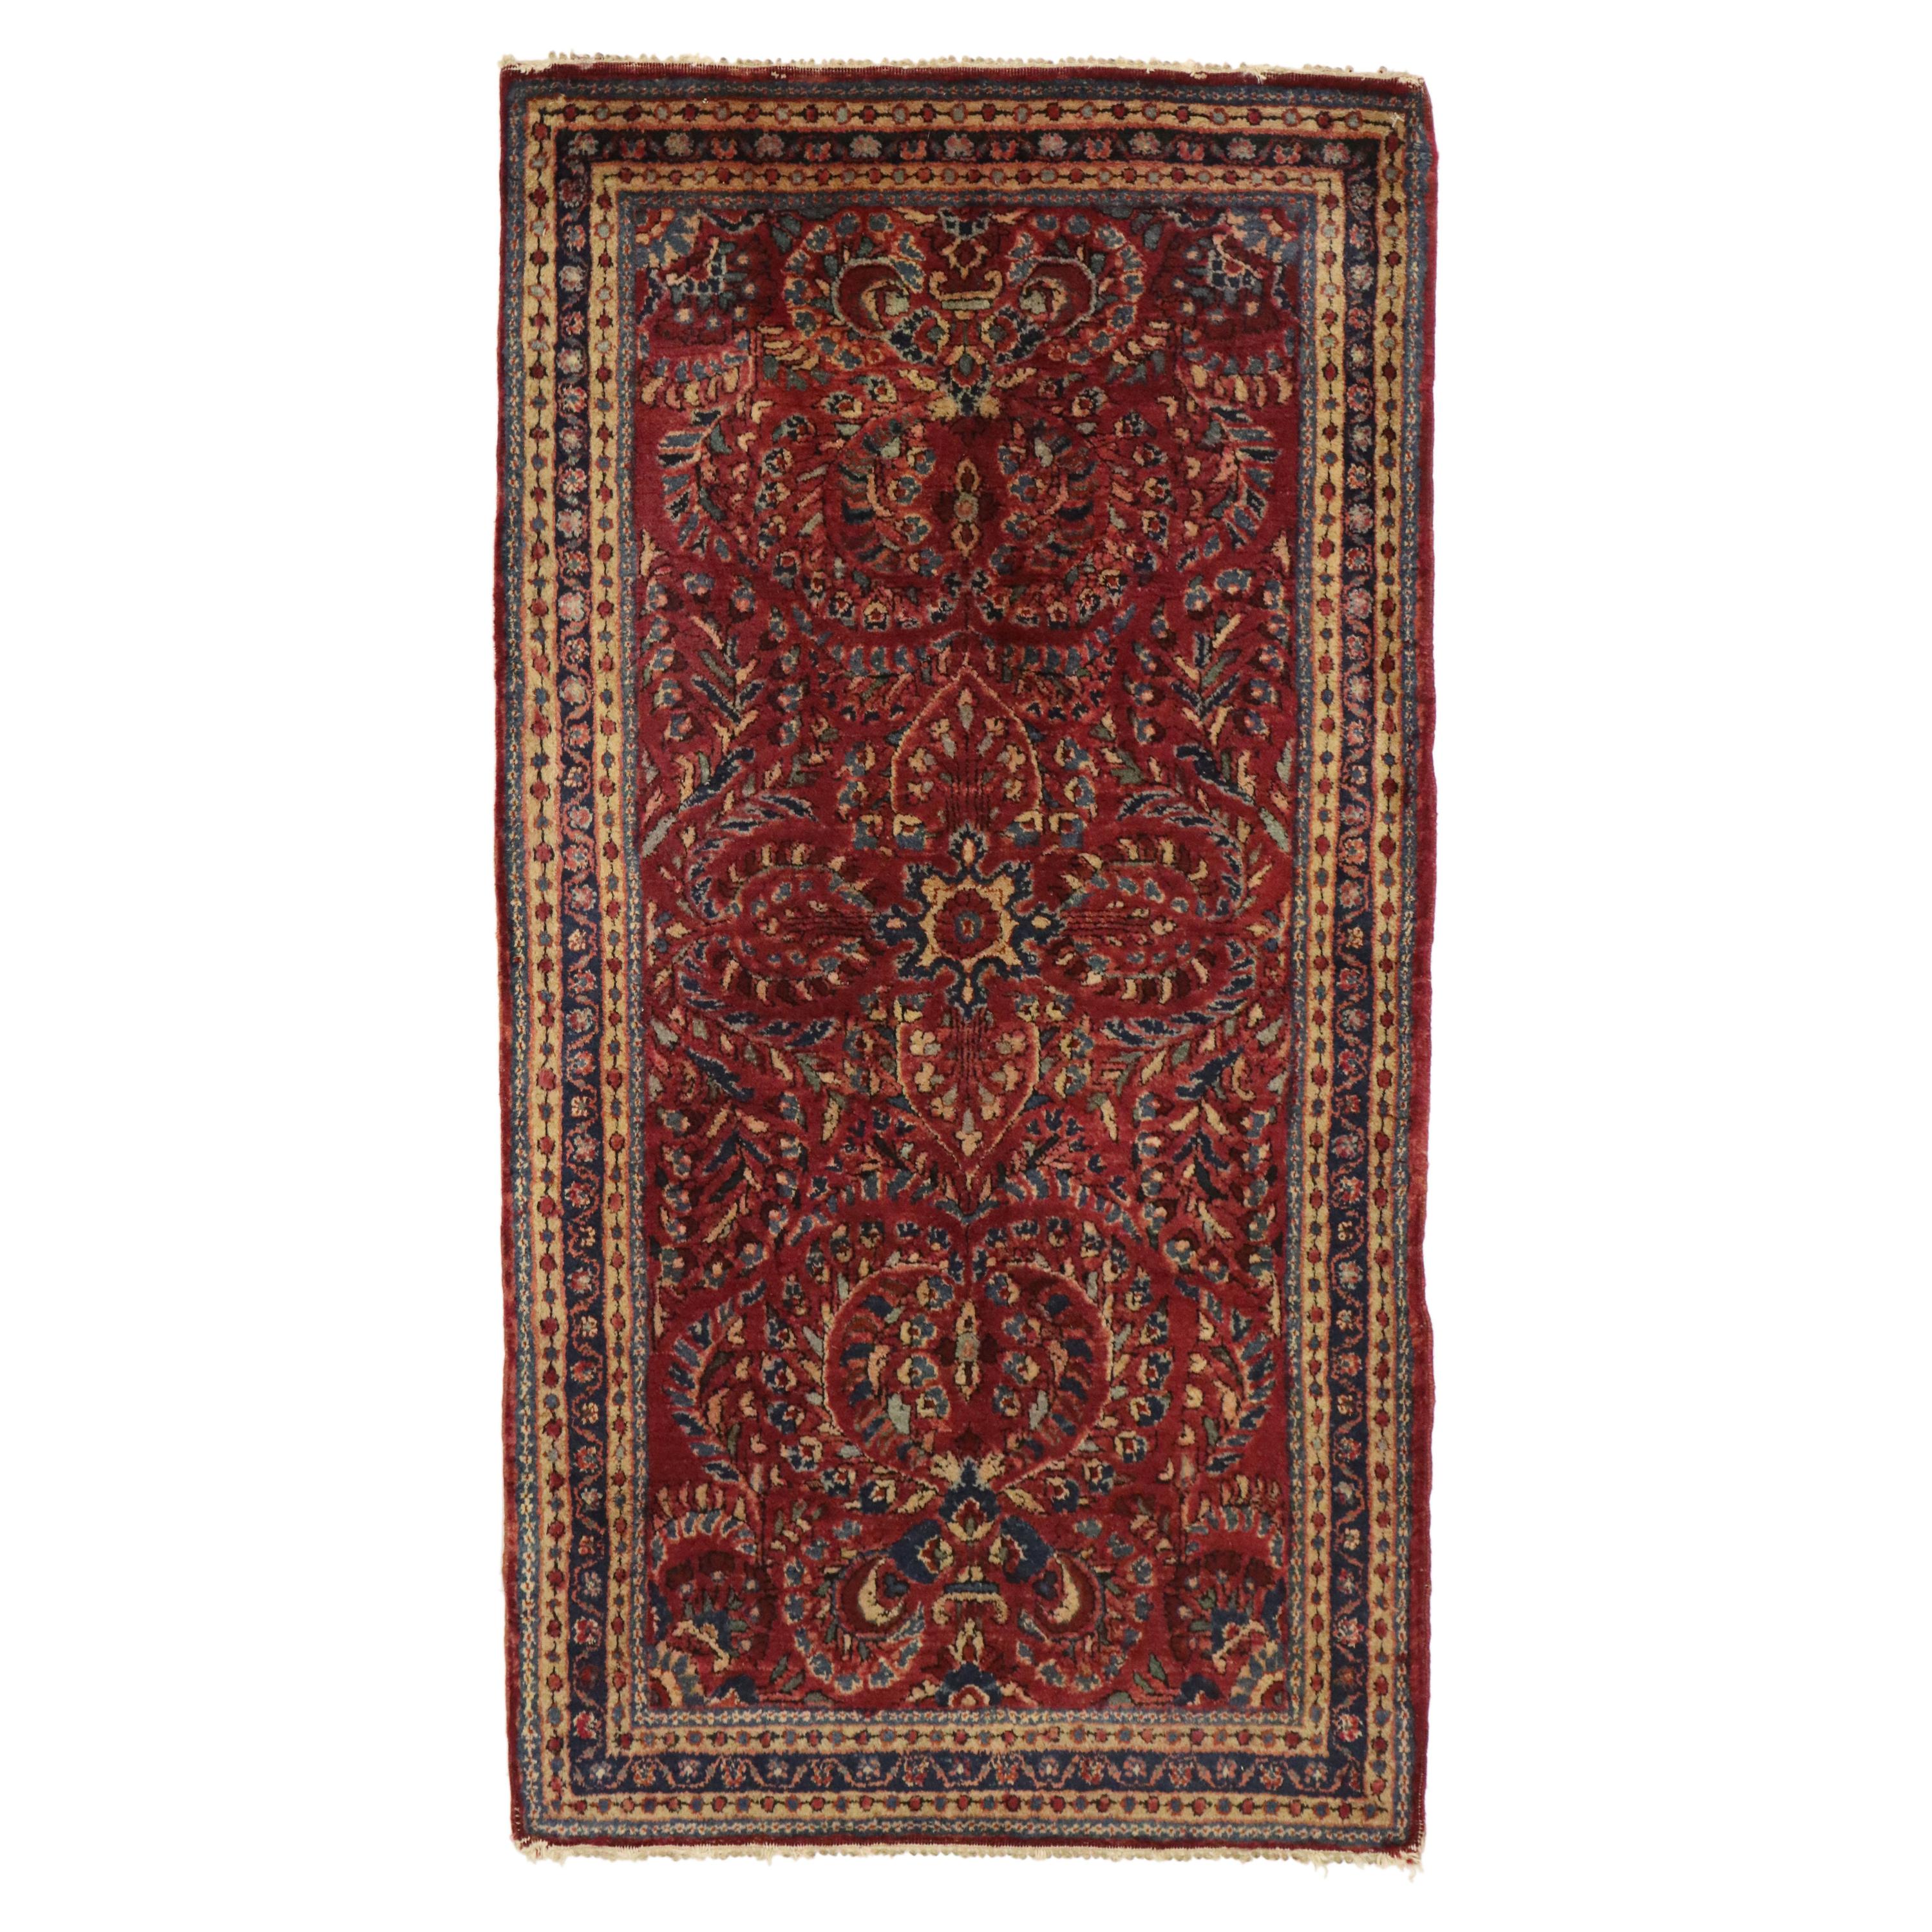 Antique Persian Sarouk Rug with Traditional Art Nouveau Style